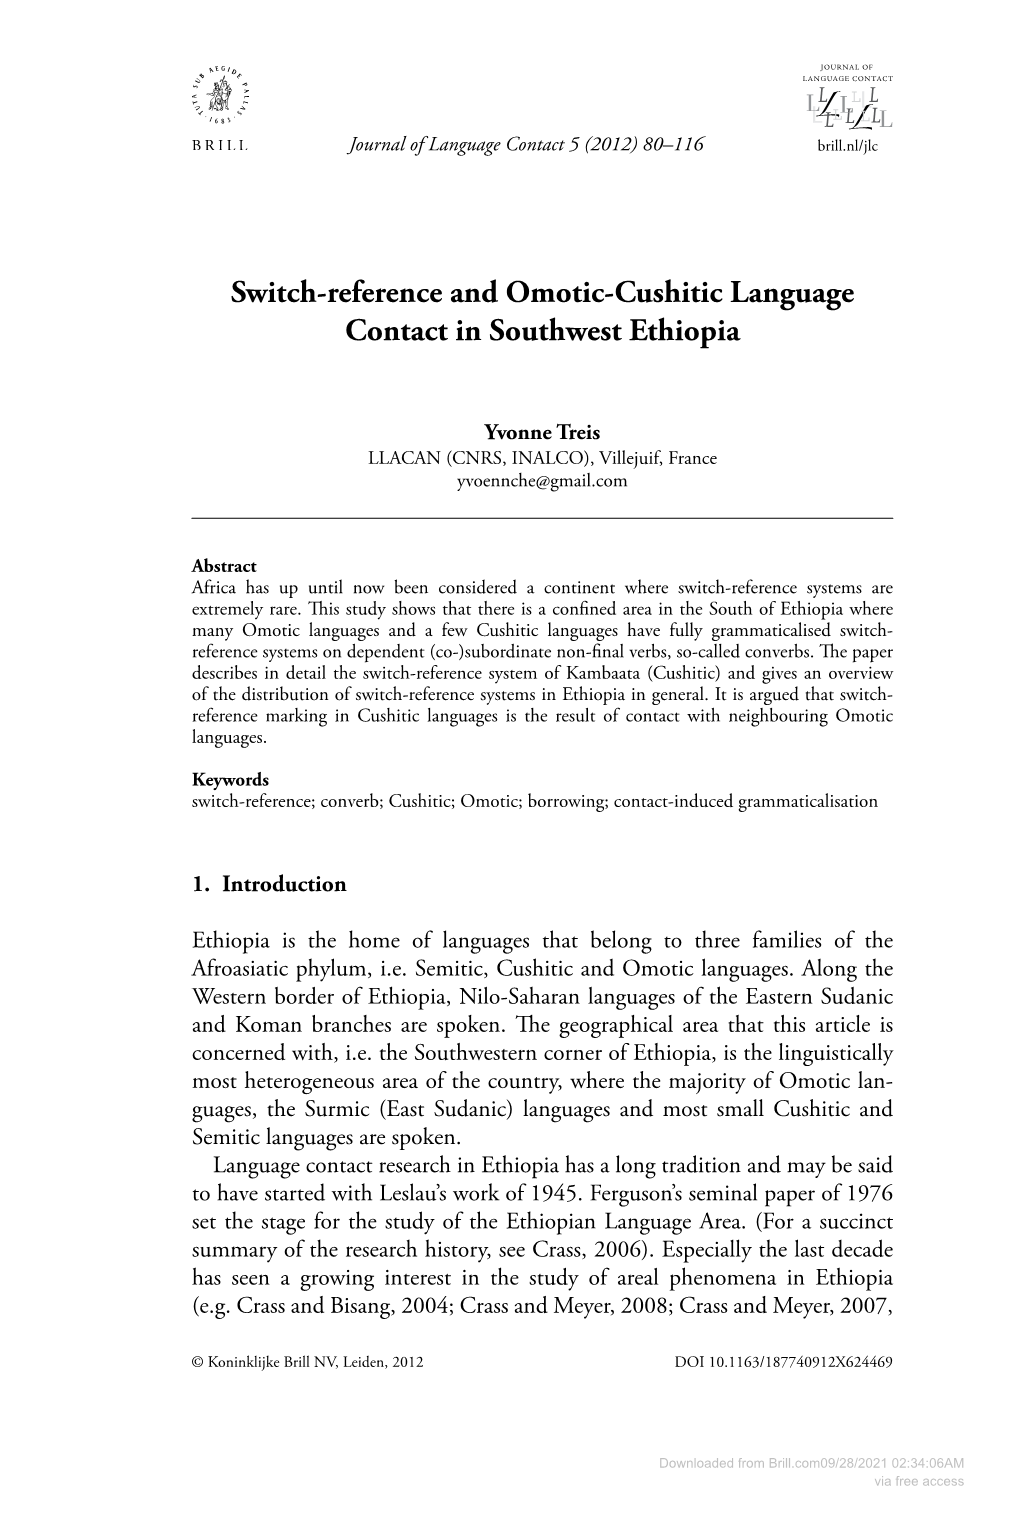 Switch-Reference and Omotic-Cushitic Language Contact in Southwest Ethiopia